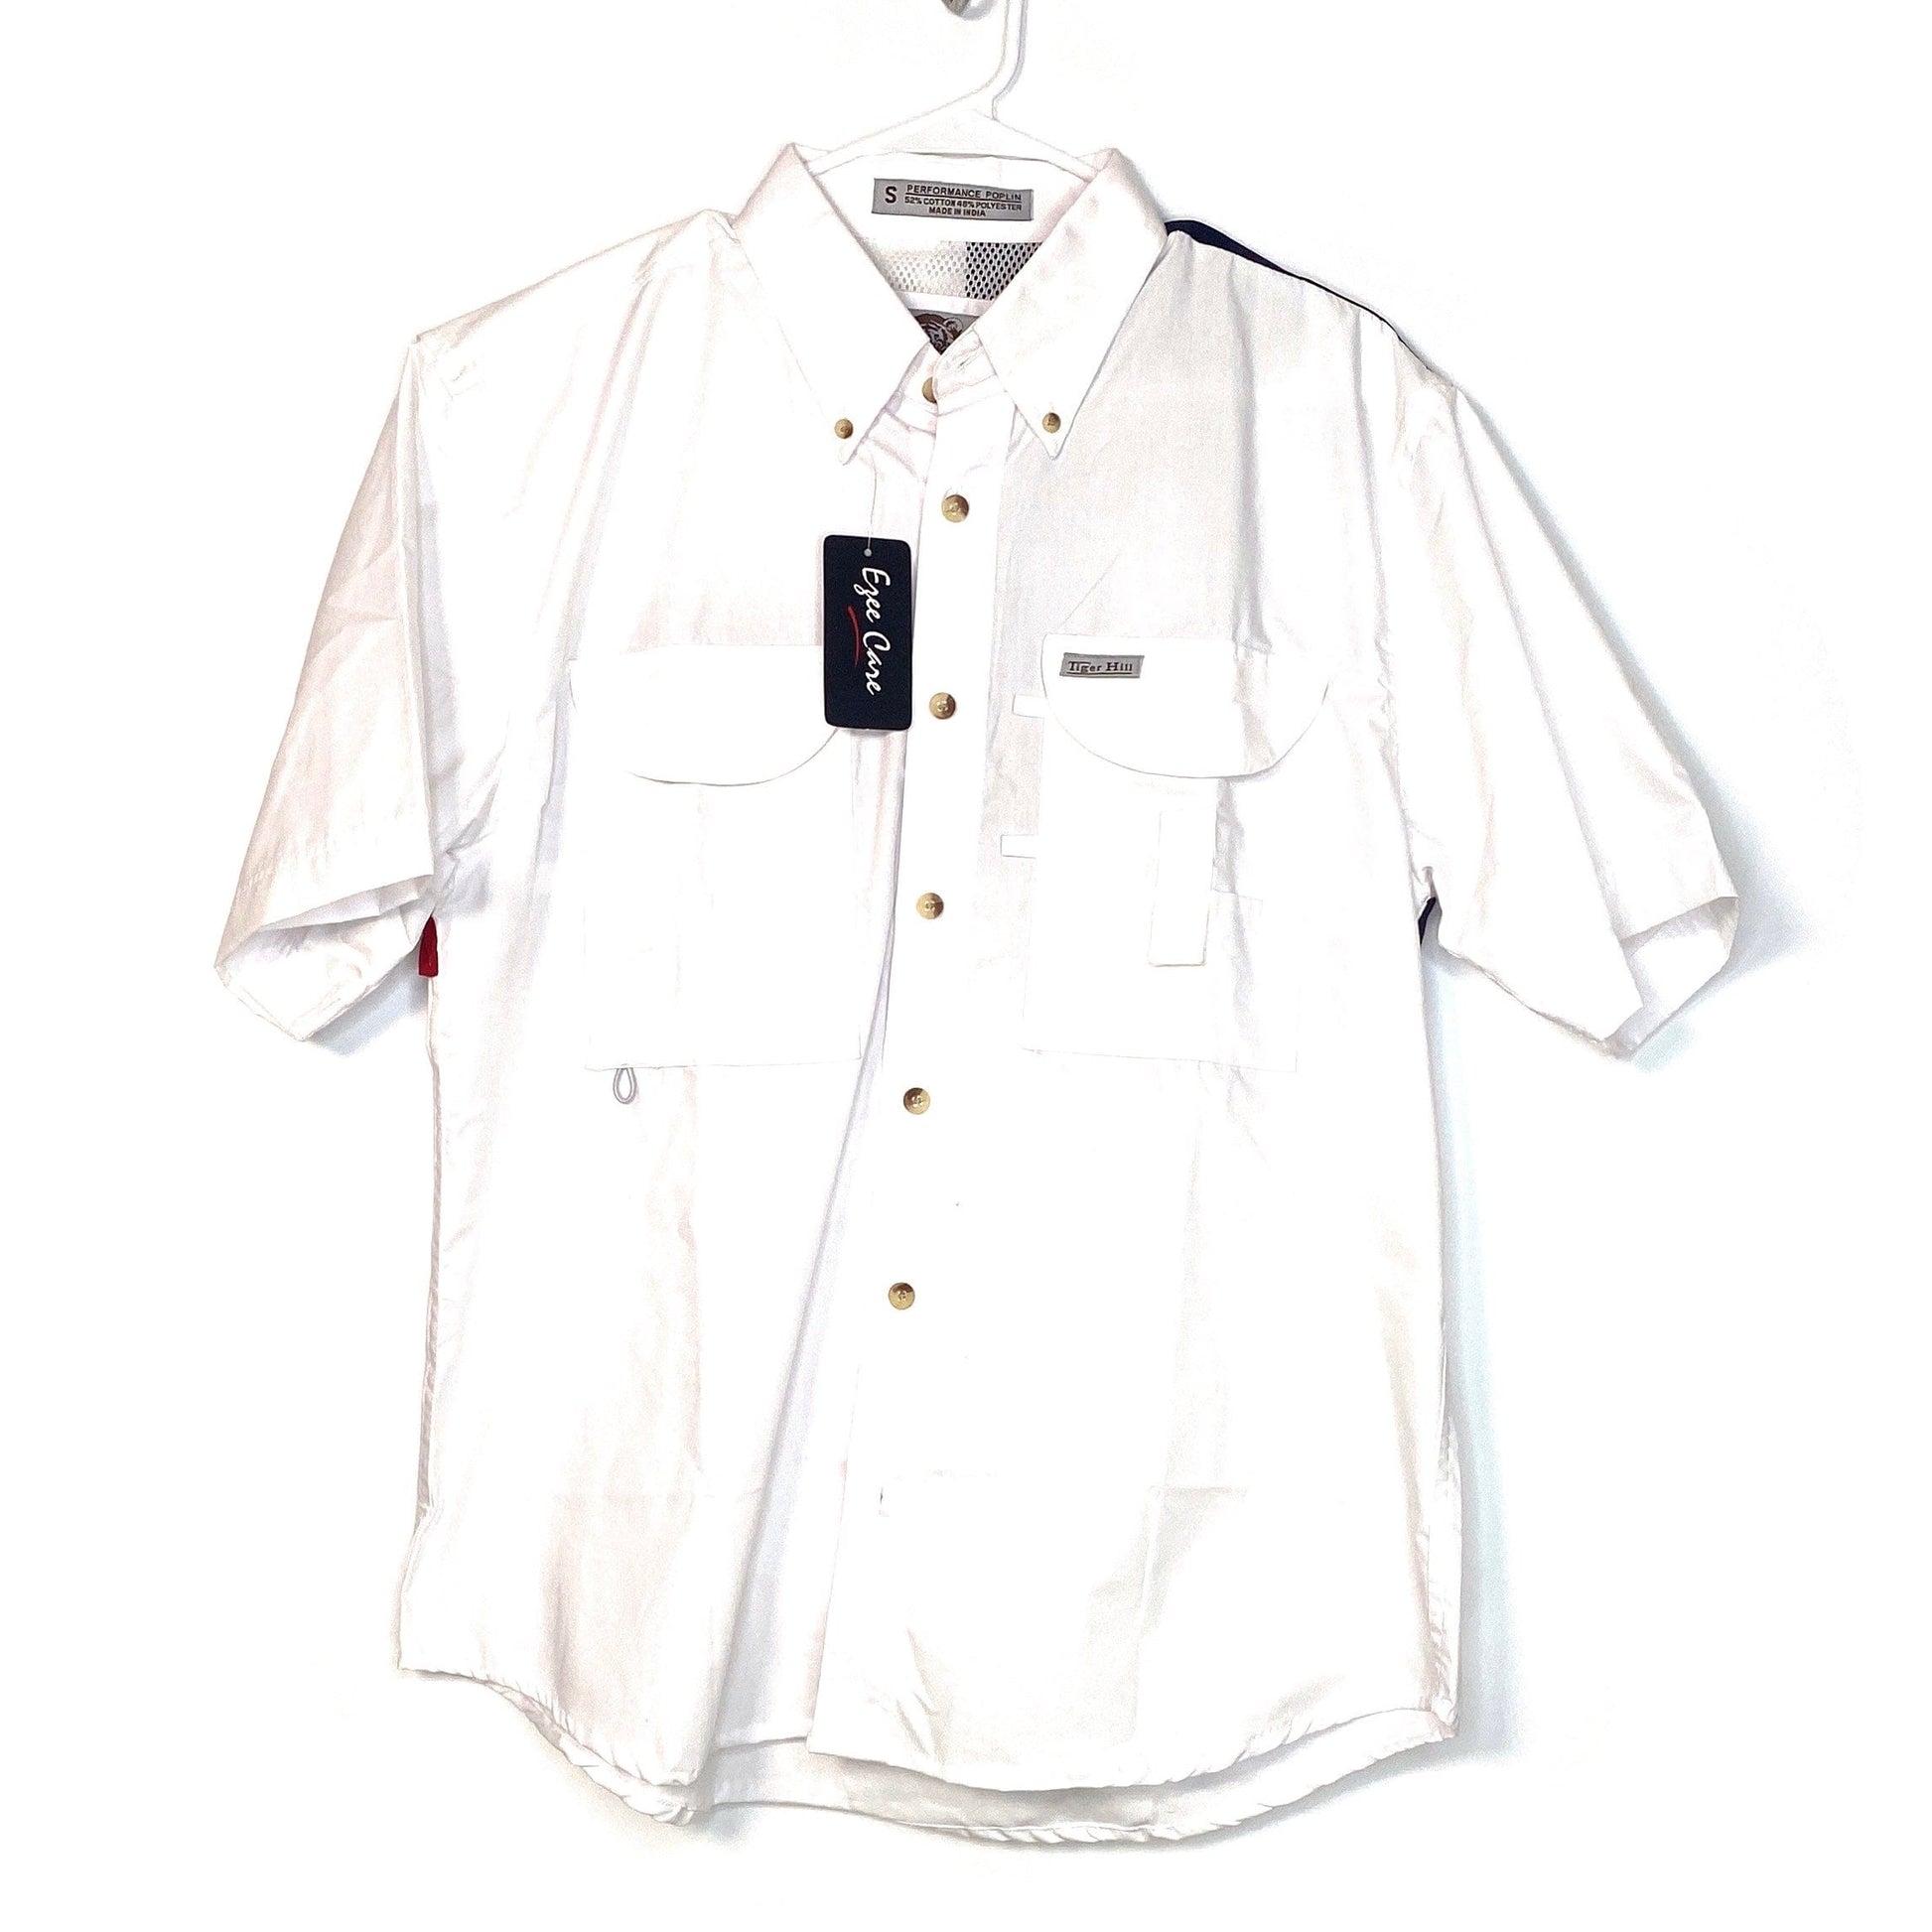 Tiger Hill Mens Size S White Vented Fishing Shirt Texas Flag Button-Up S/S